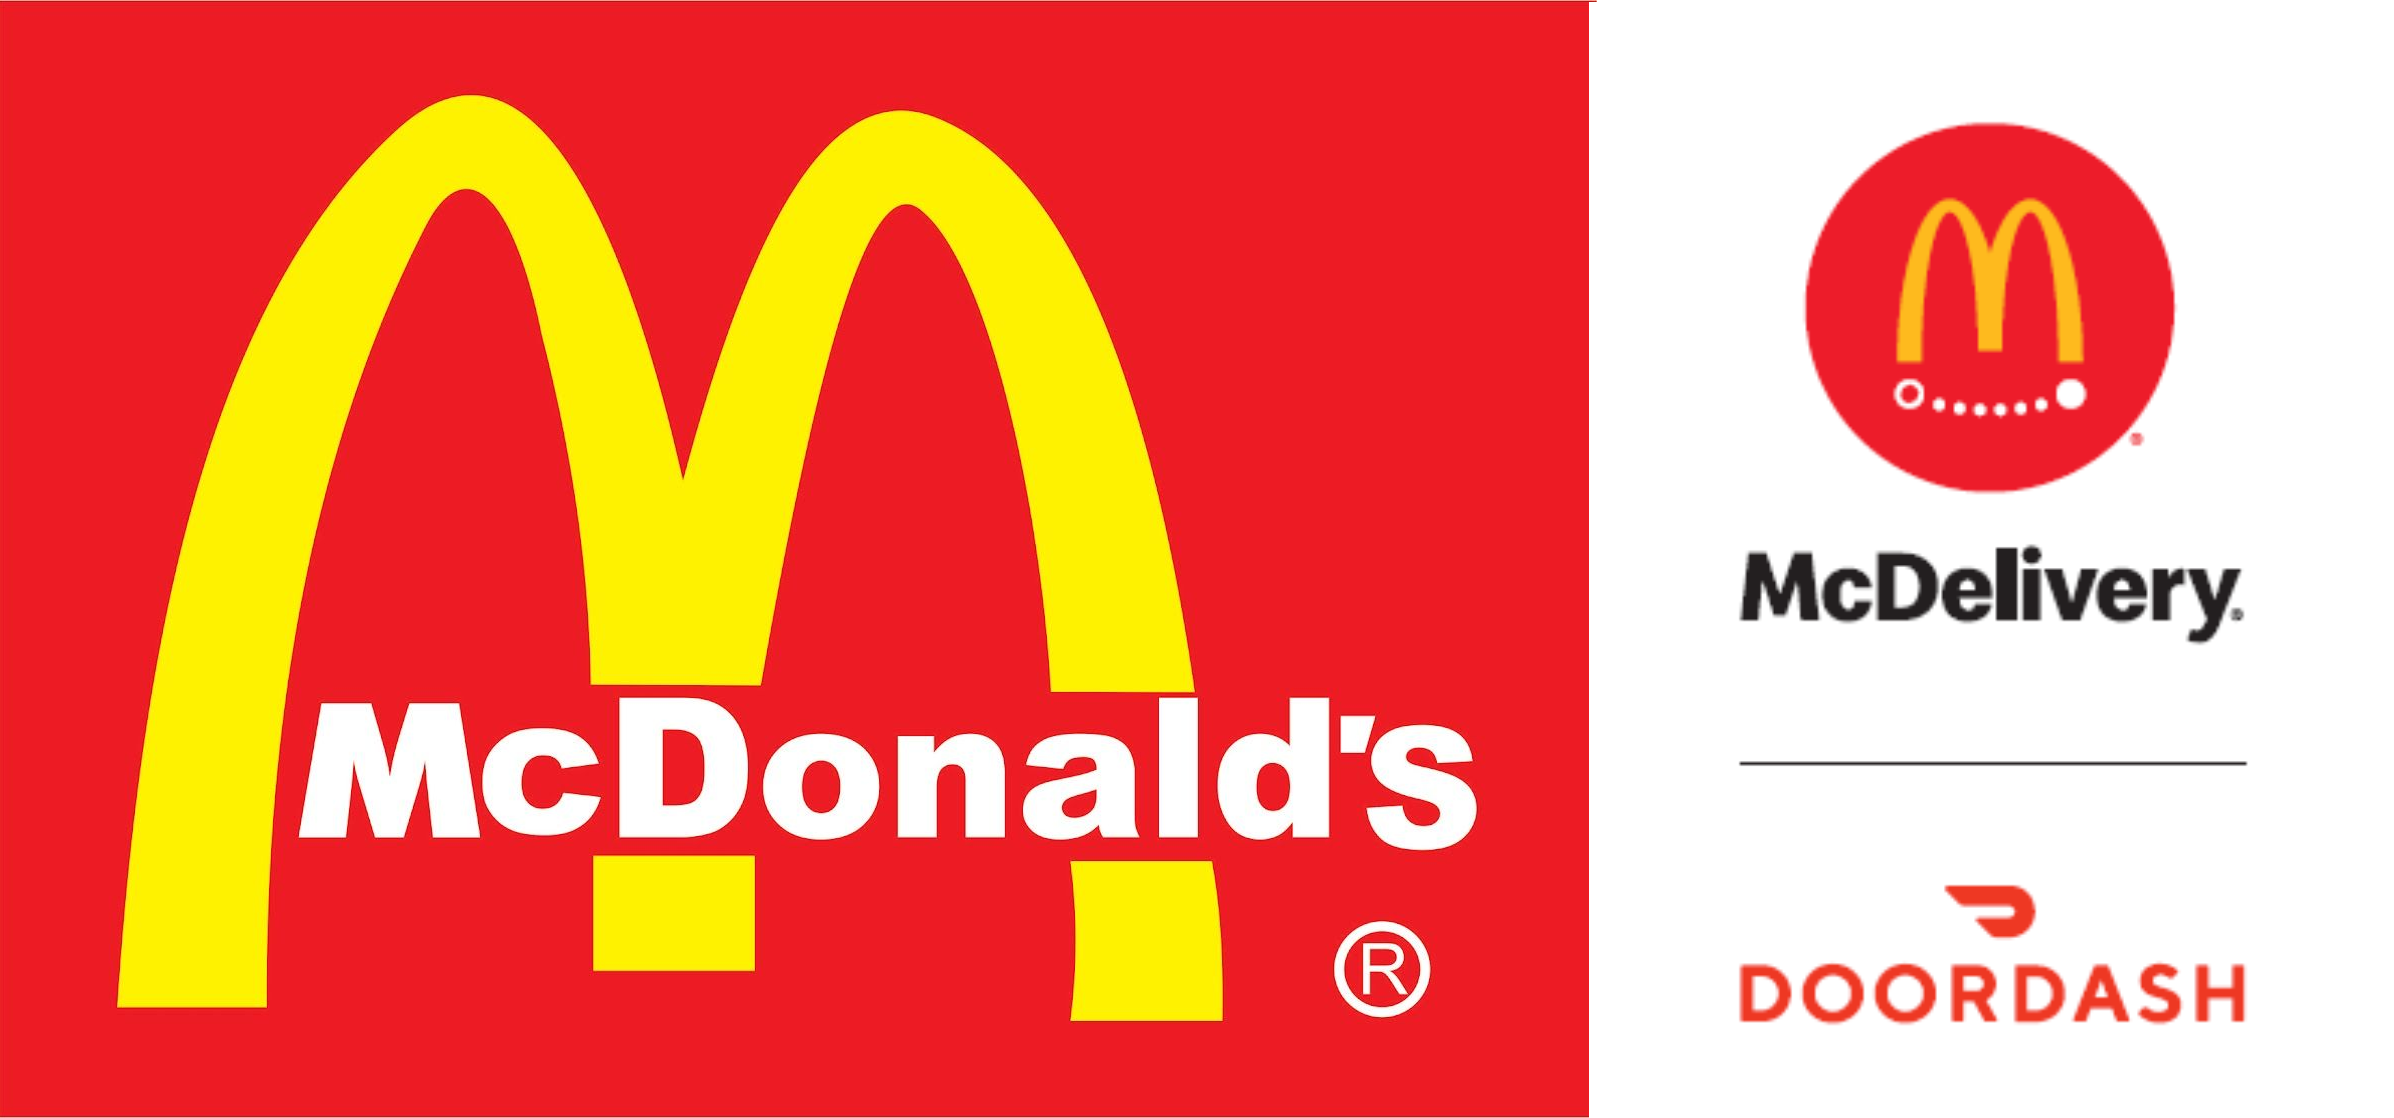 McDonald's (Delivery available via McDelivery)